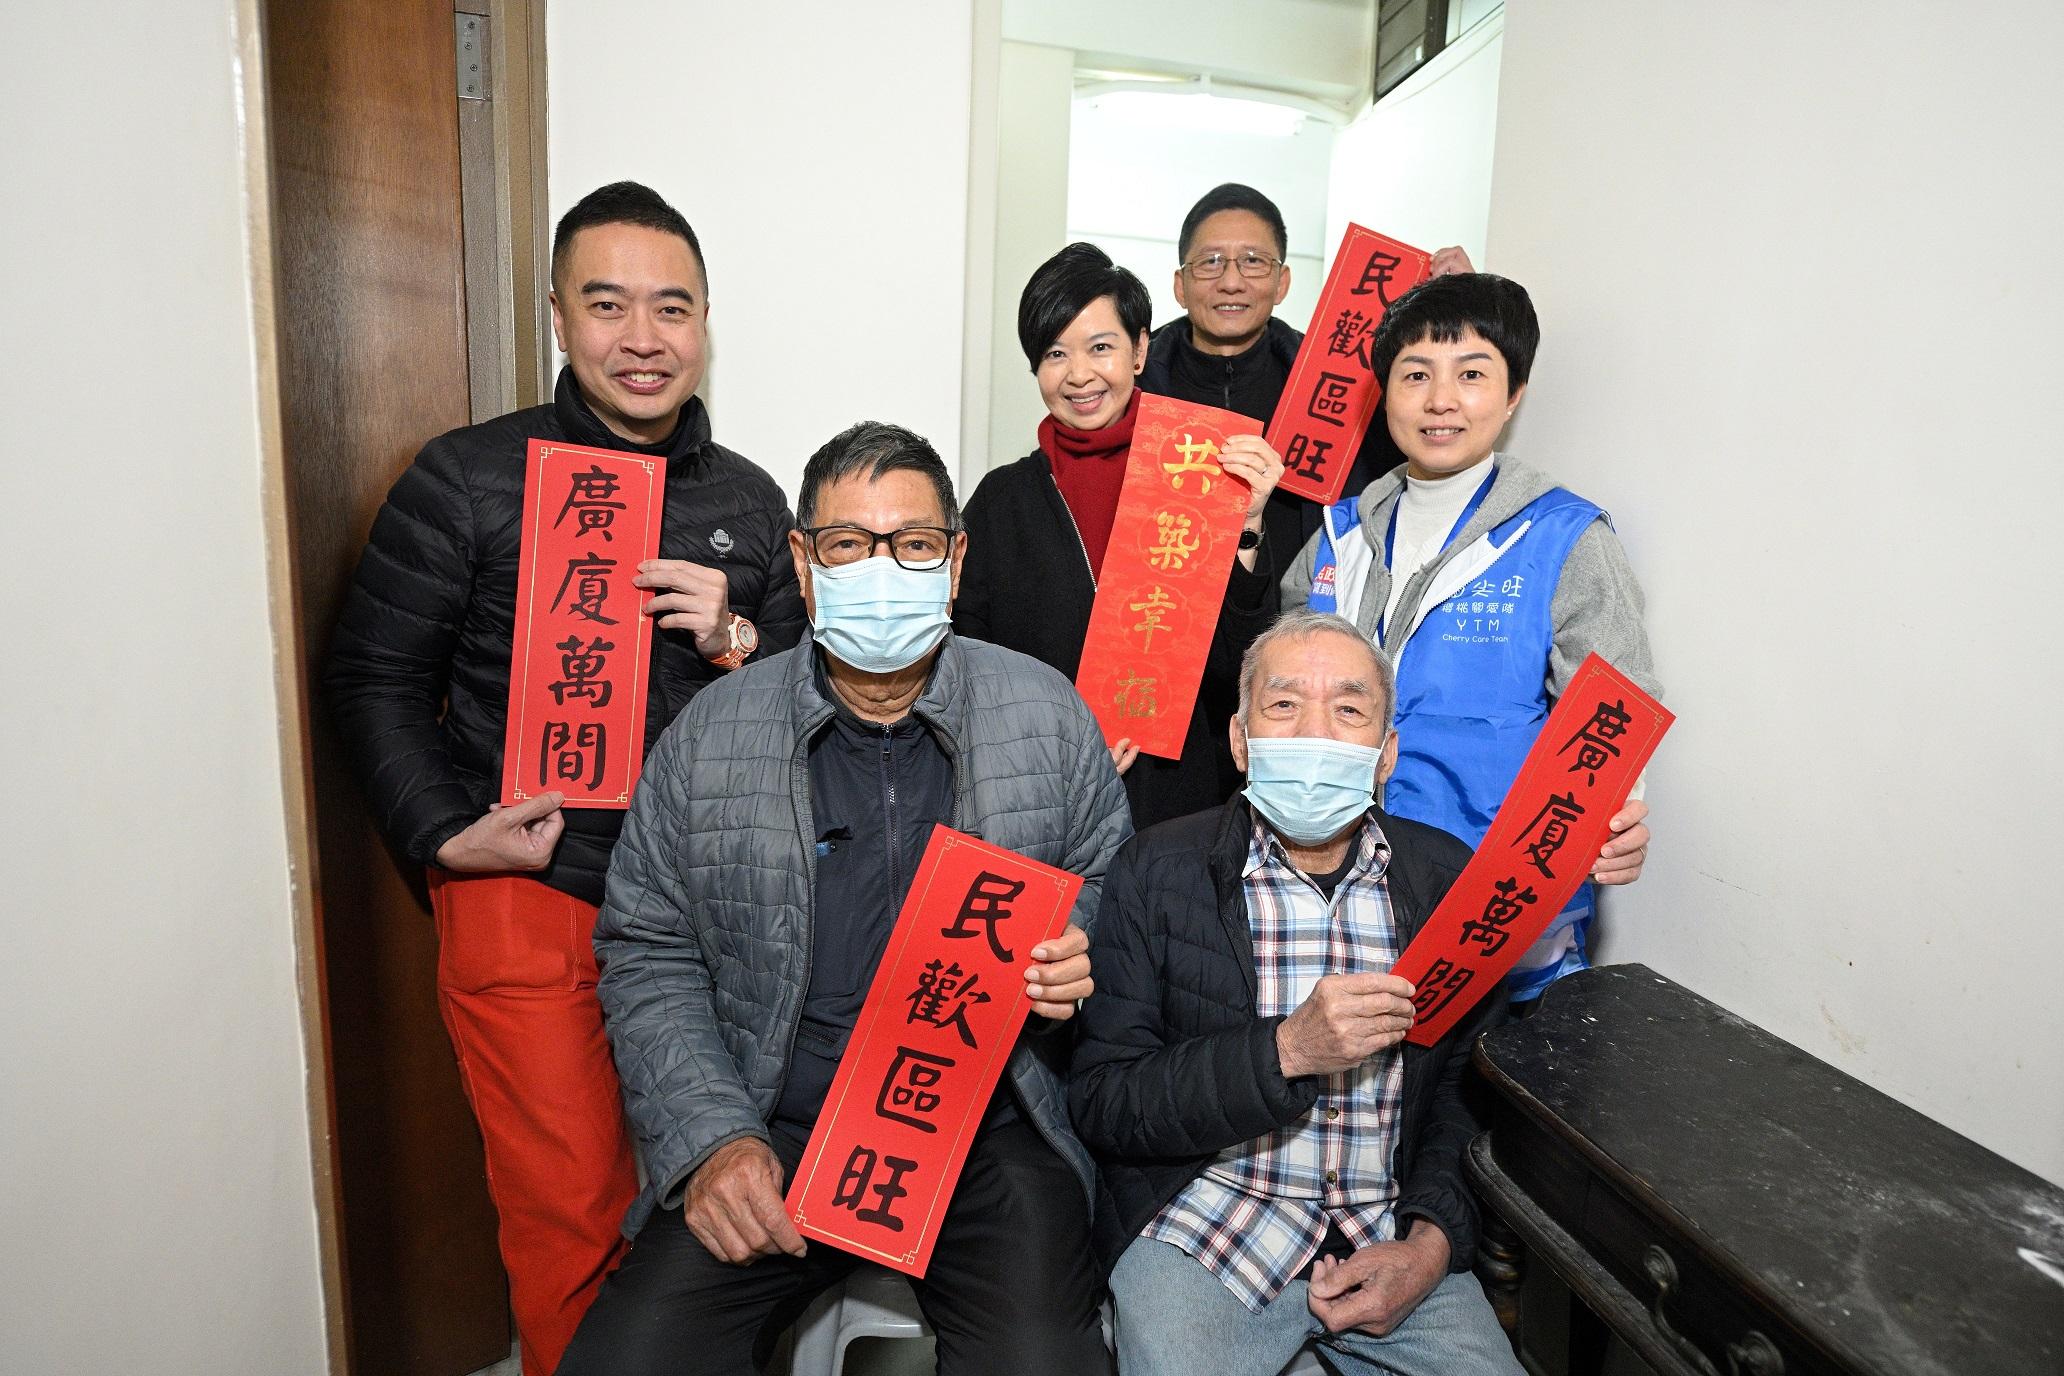 The Secretary for Housing, Ms Winnie Ho, visited Yau Tsim Mong District this morning (February 9) as part of the year-end caring visits in 18 districts. Photo shows Ms Ho (third left), accompanied by the District Officer (Yau Tsim Mong), Mr Edward Yu (first left), during her visit to singleton elderly people living in Tai Kok Tsui subdivided flats to distribute fai chuns and celebrate with them the New Year ahead, together with a Yau Tsim Mong District Council member and representative from a Care Team (Yau Tsim Mong).